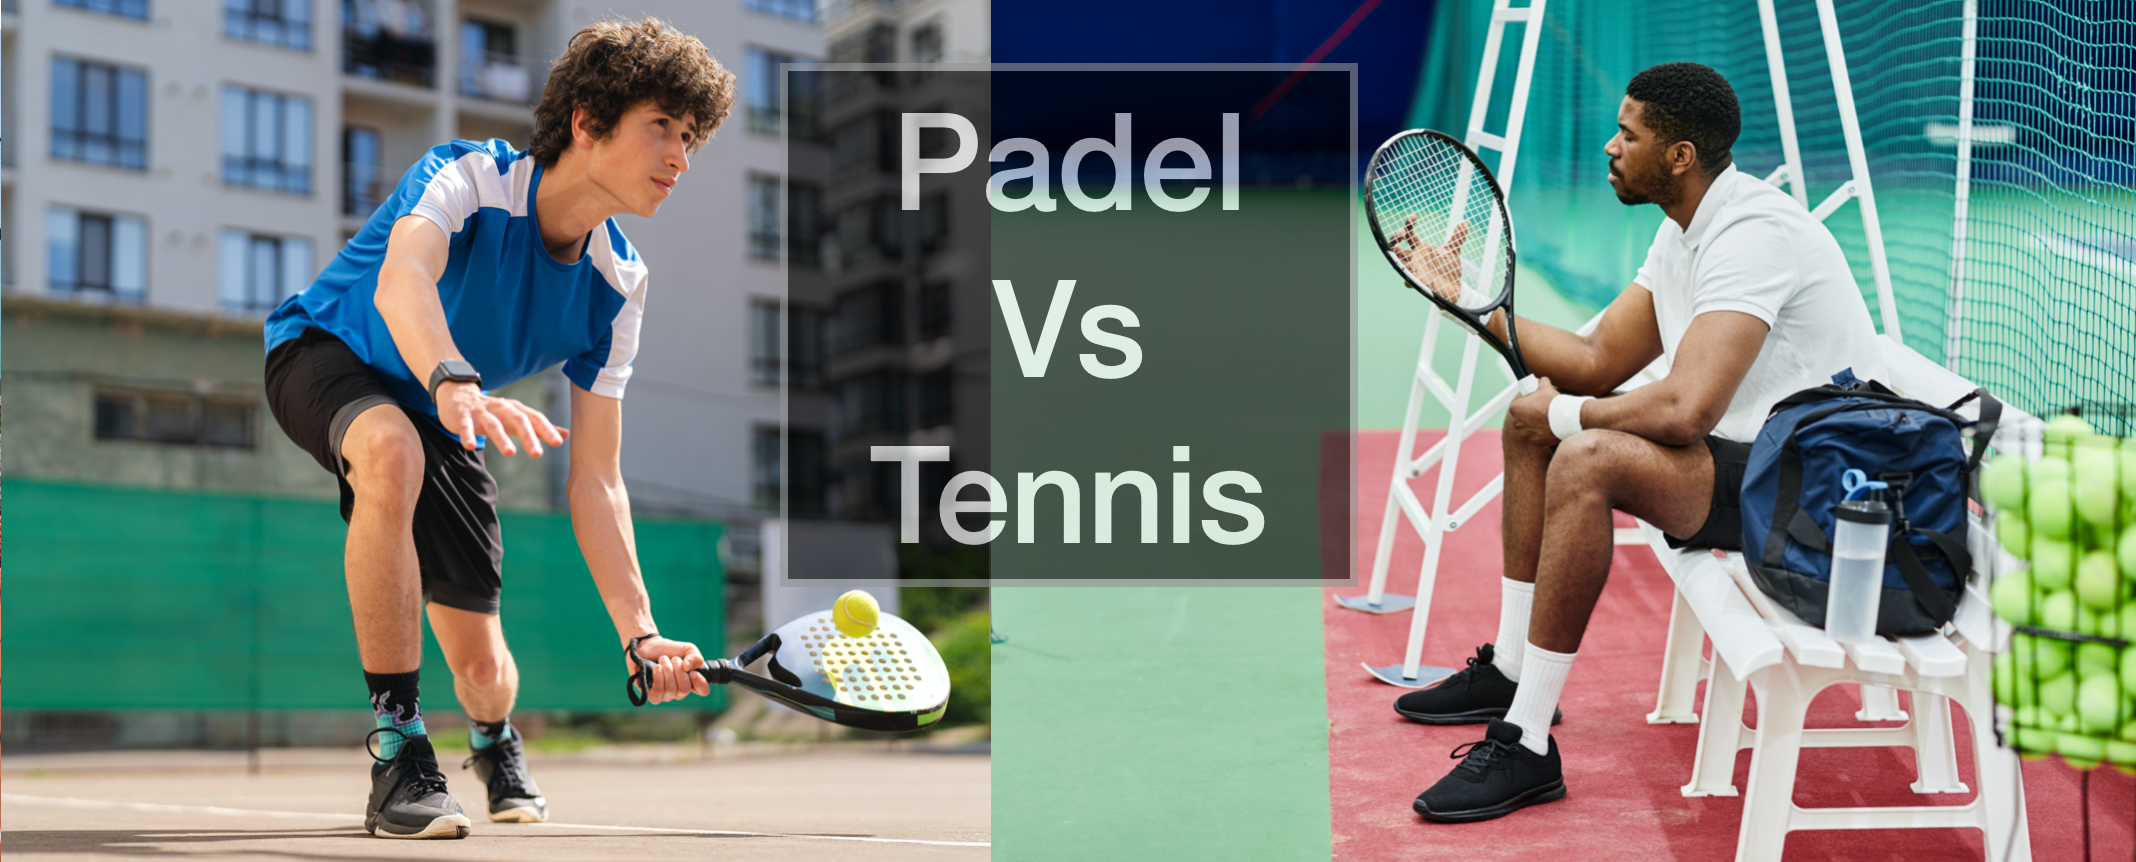 Padel Vs Tennis - the main differences - Learn at Racquet Point